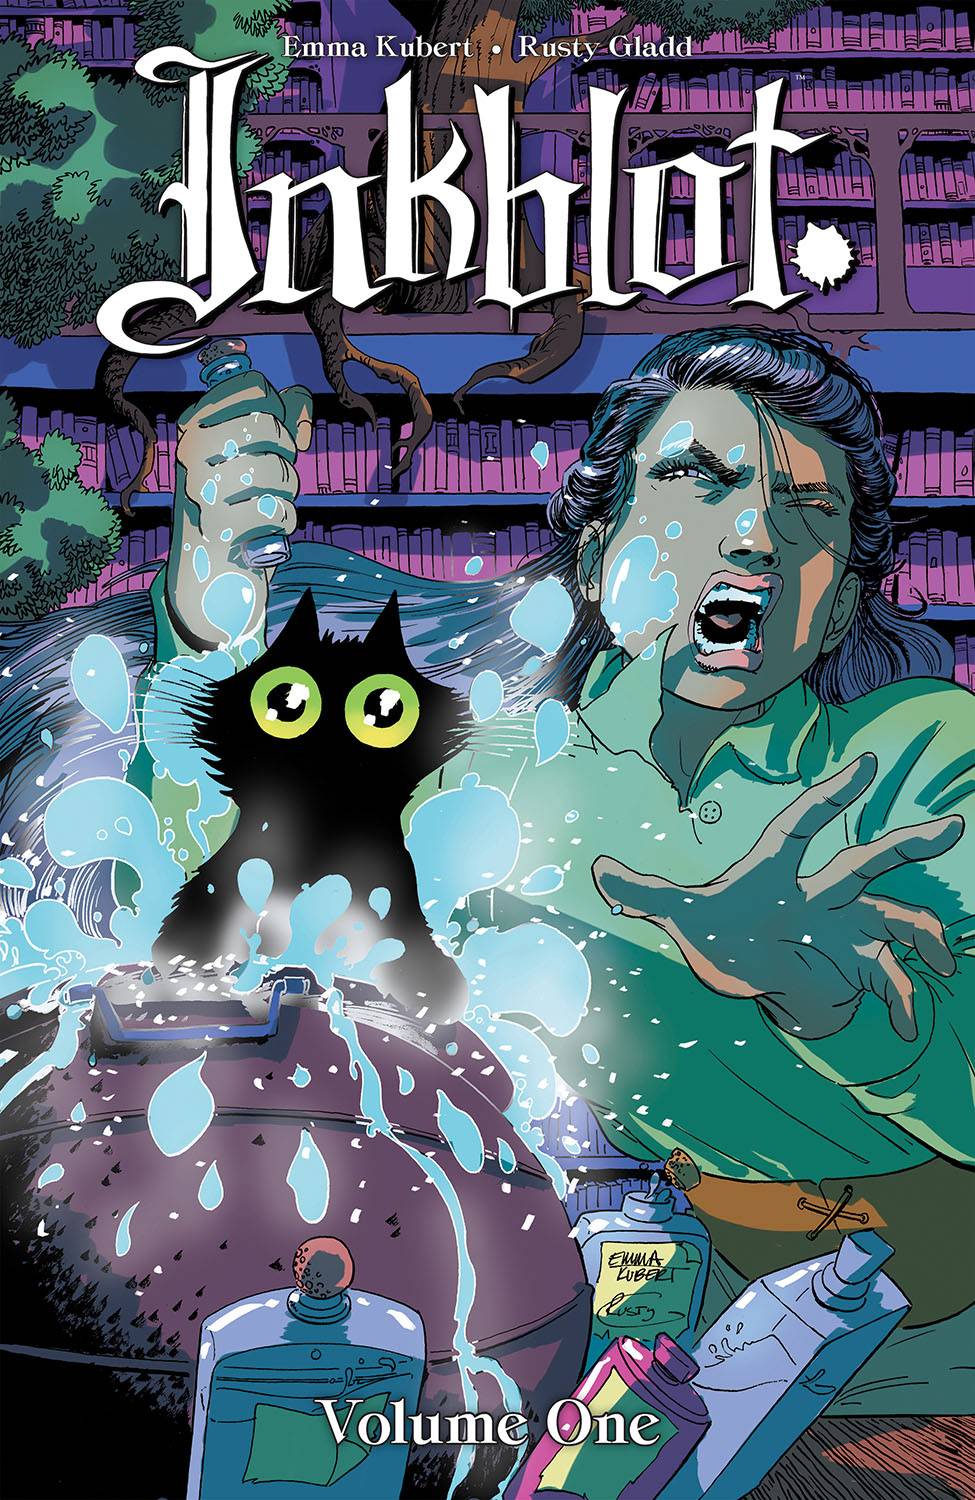 A young lady with dark hair looks surprised and disgusted as she is splashed by a cat landing in her cauldron. She is clutching a vial, with several other bottles on the table by the cauldron. Behind her are vast bookcases with trees growing on them.